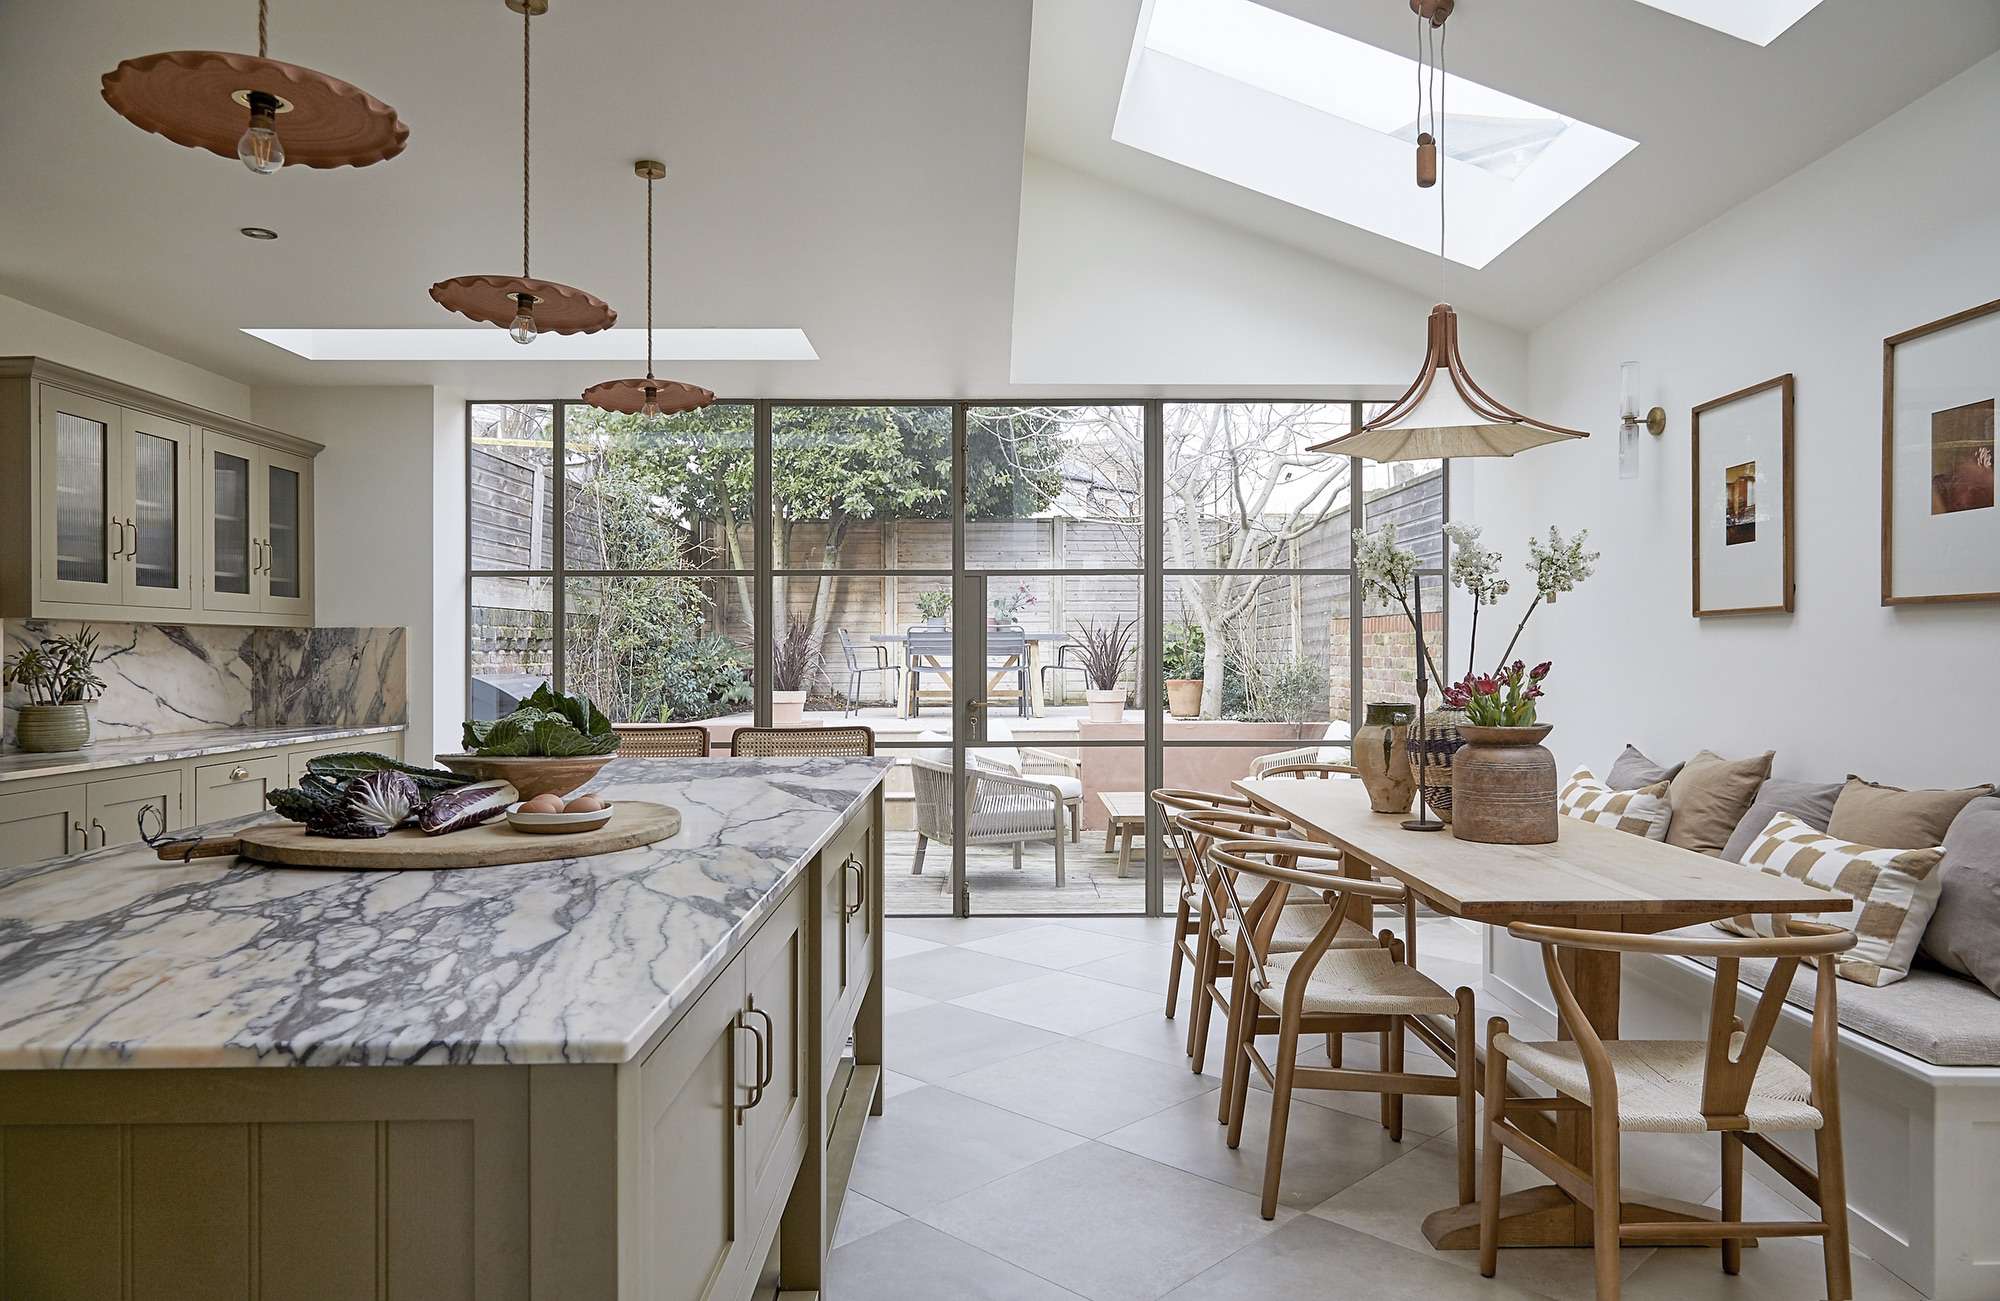 Clements E5 - A beautifully designed London family home, with many characterful features and a stunning devol kitchen - The Location Guys